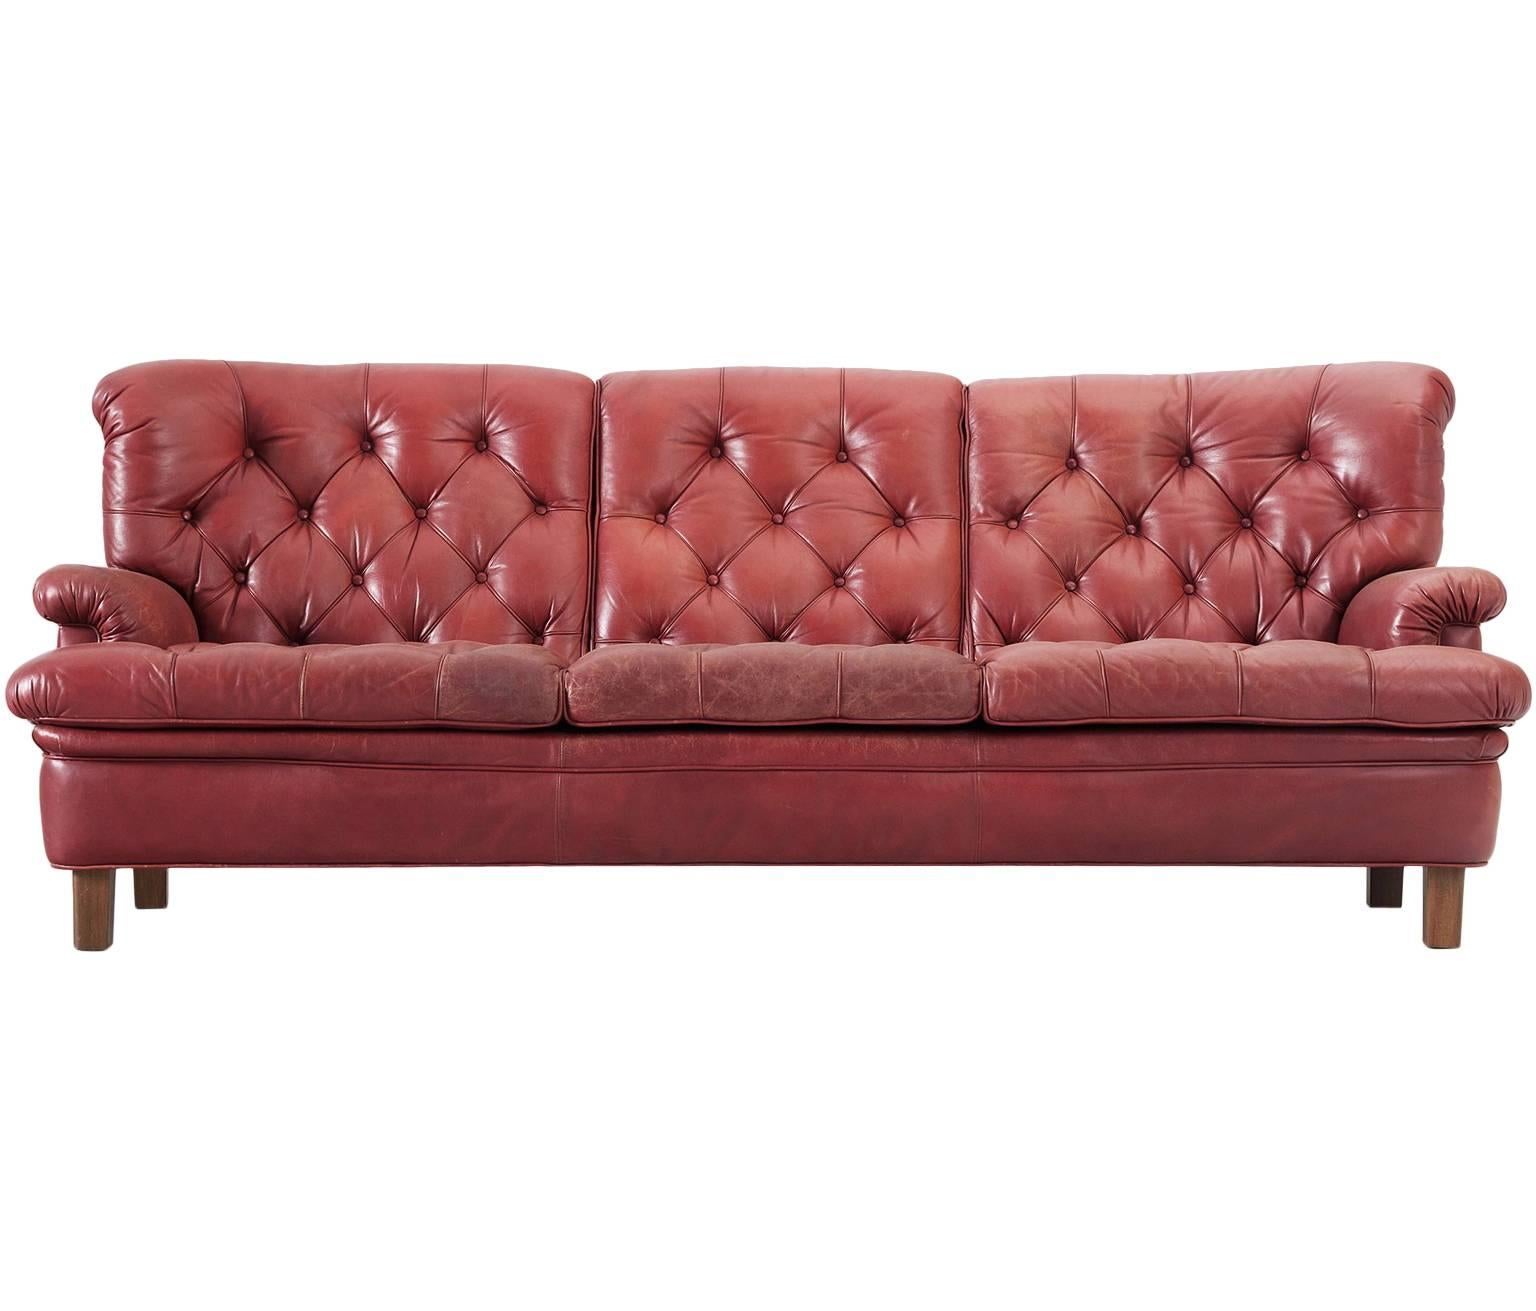 Arne Norell Three-Seat Sofa in Patinated Red Leather